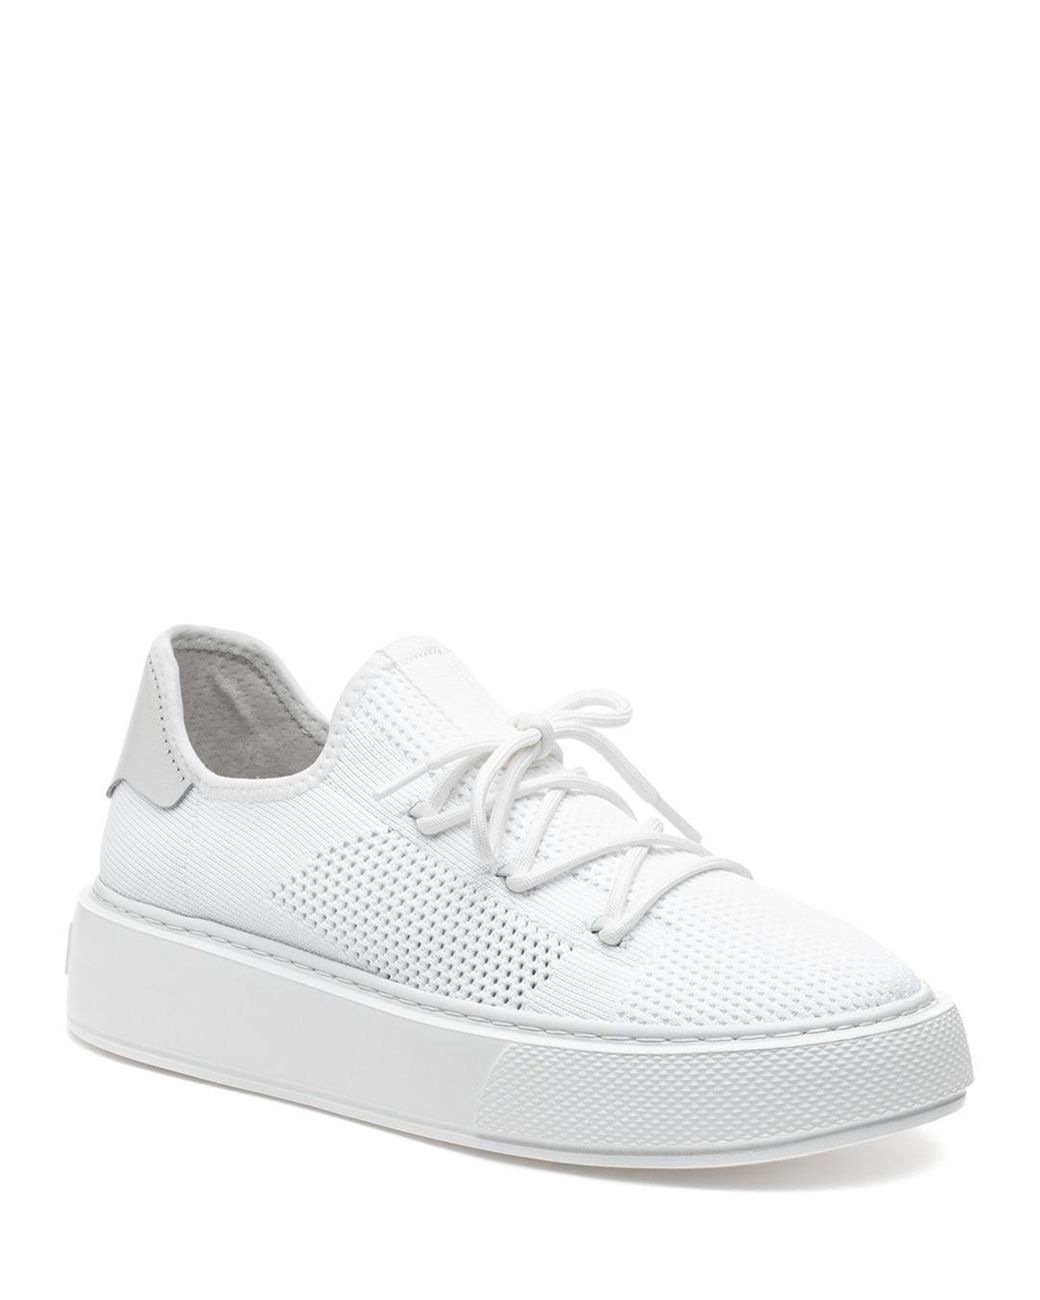 J/Slides Damien Perforated Knit Platform Sneakers in White | Lyst